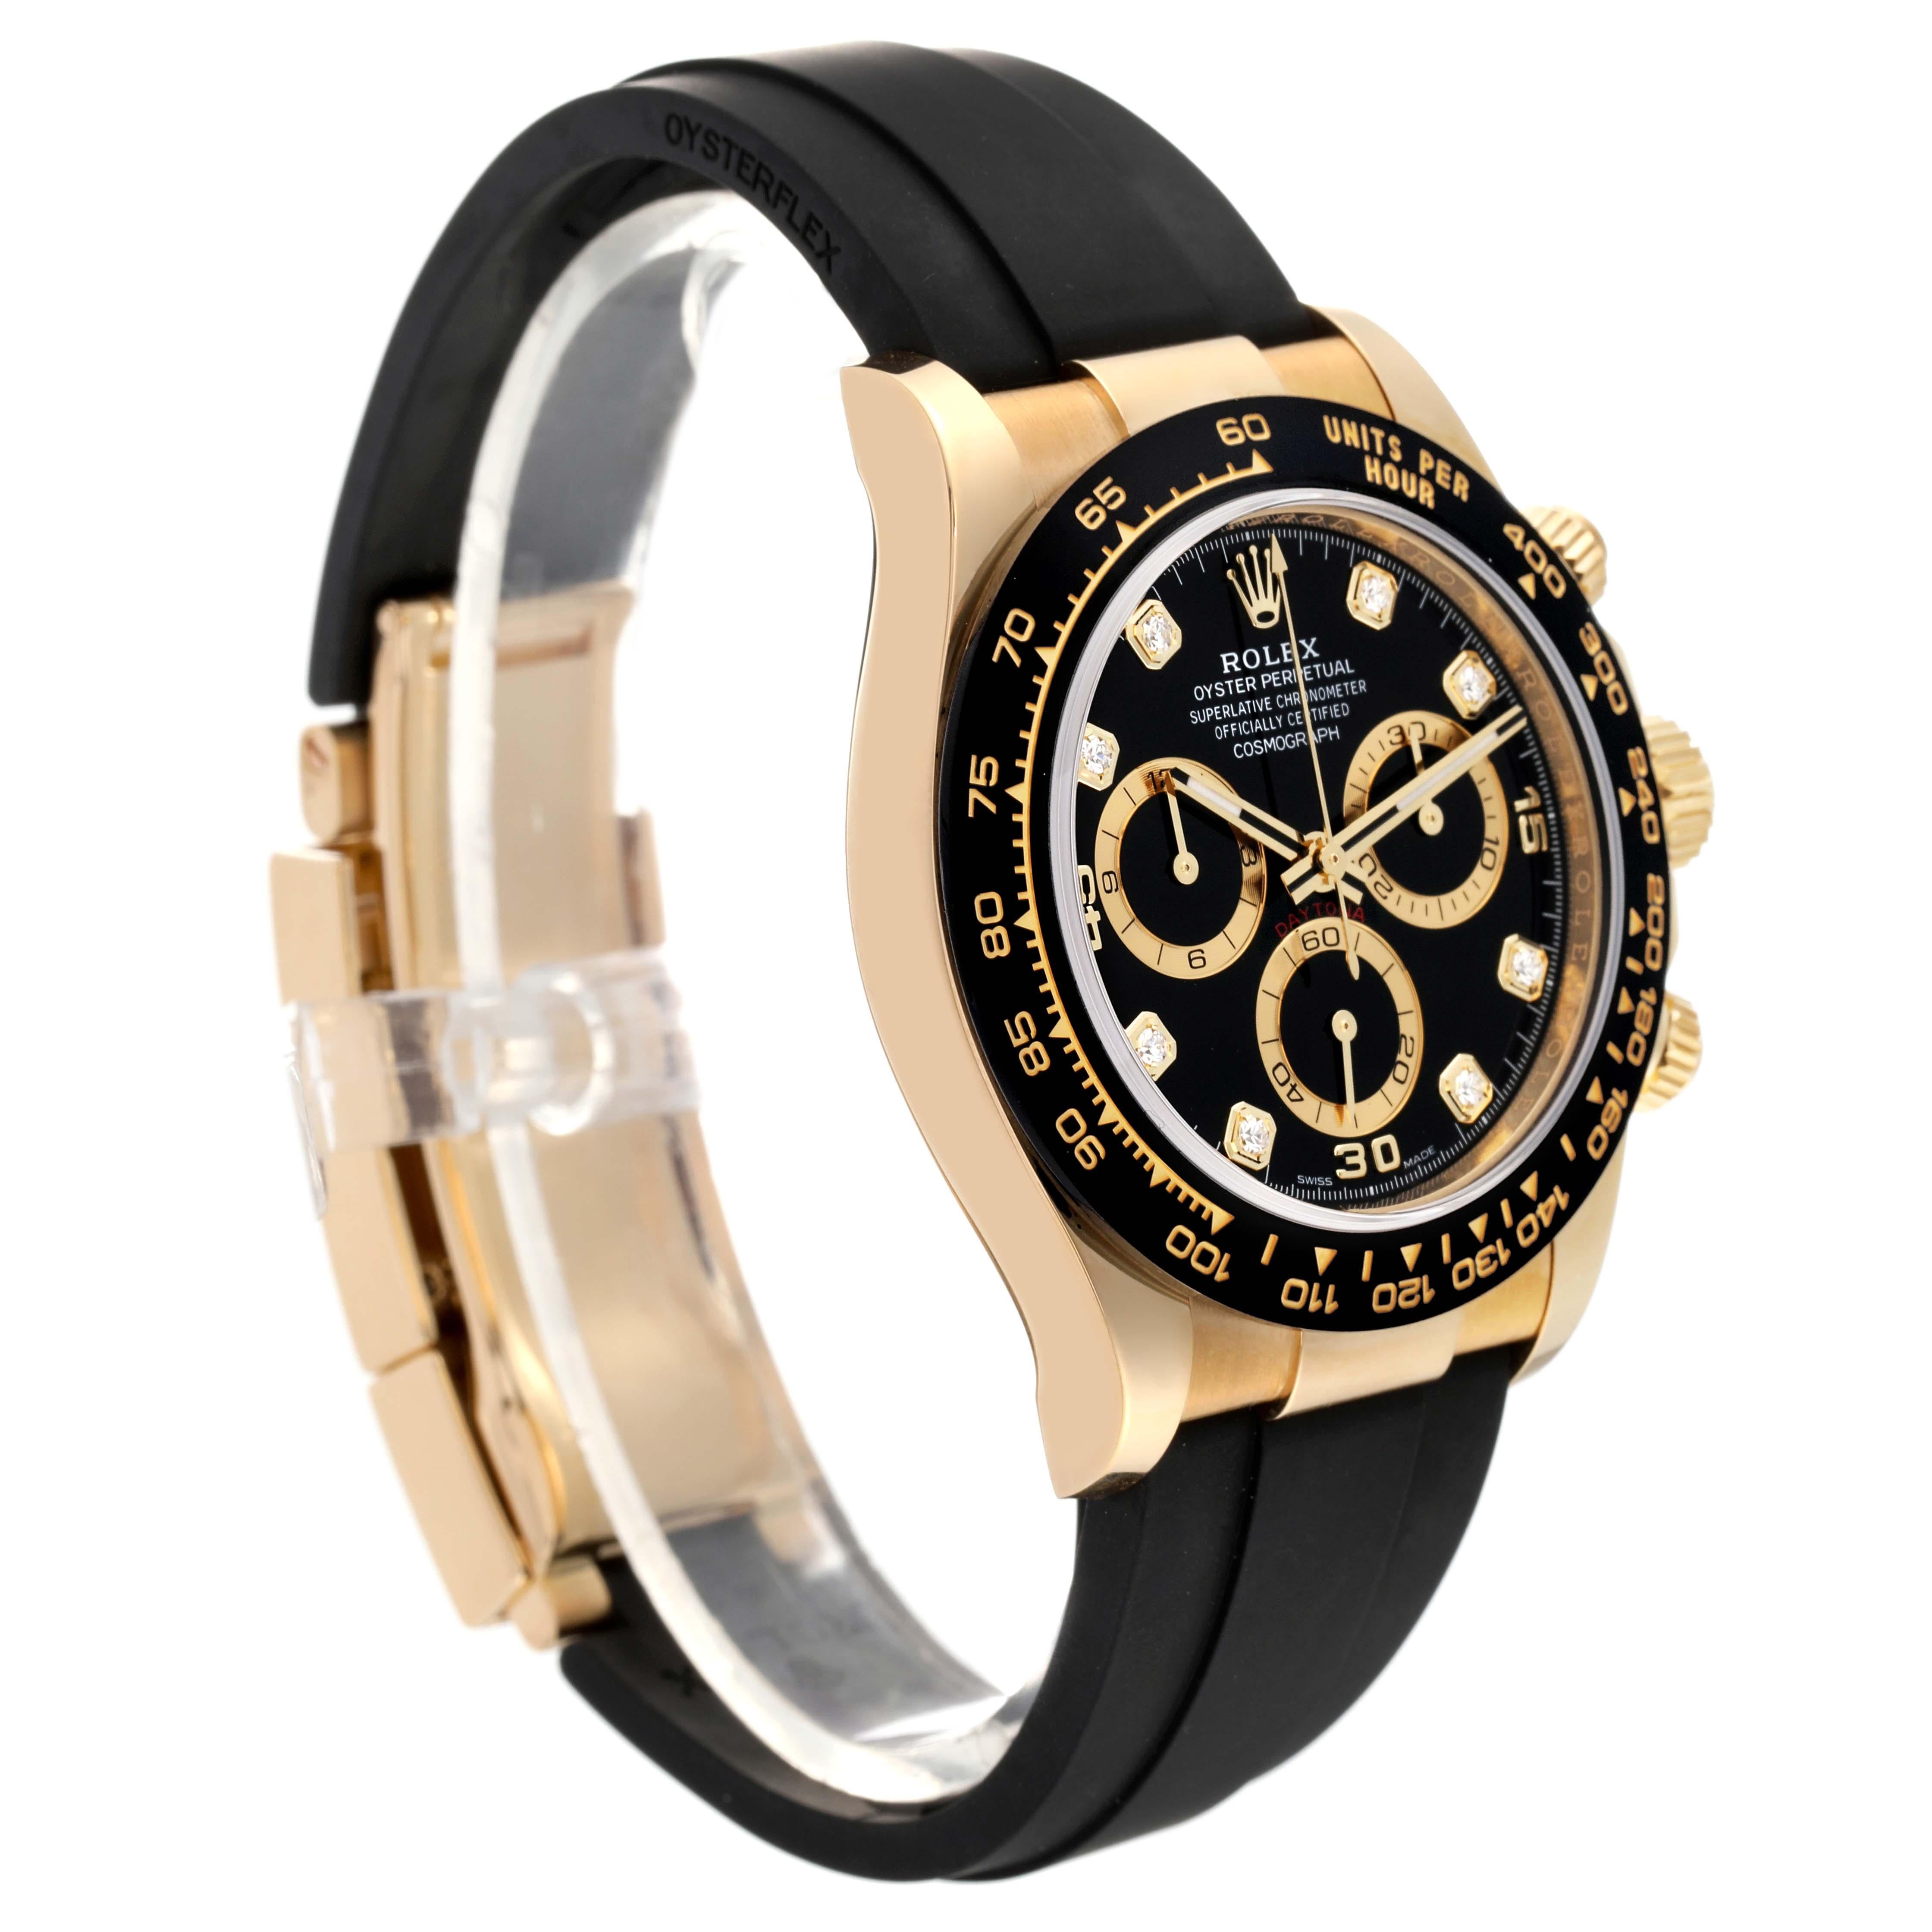 Rolex Daytona Yellow Gold Diamond Dial Ceramic Bezel Mens Watch 116518 Box Card. Officially certified chronometer automatic self-winding movement. Chronograph function. 18K yellow gold case 40.0 mm in diameter.  Special screw-down push buttons.